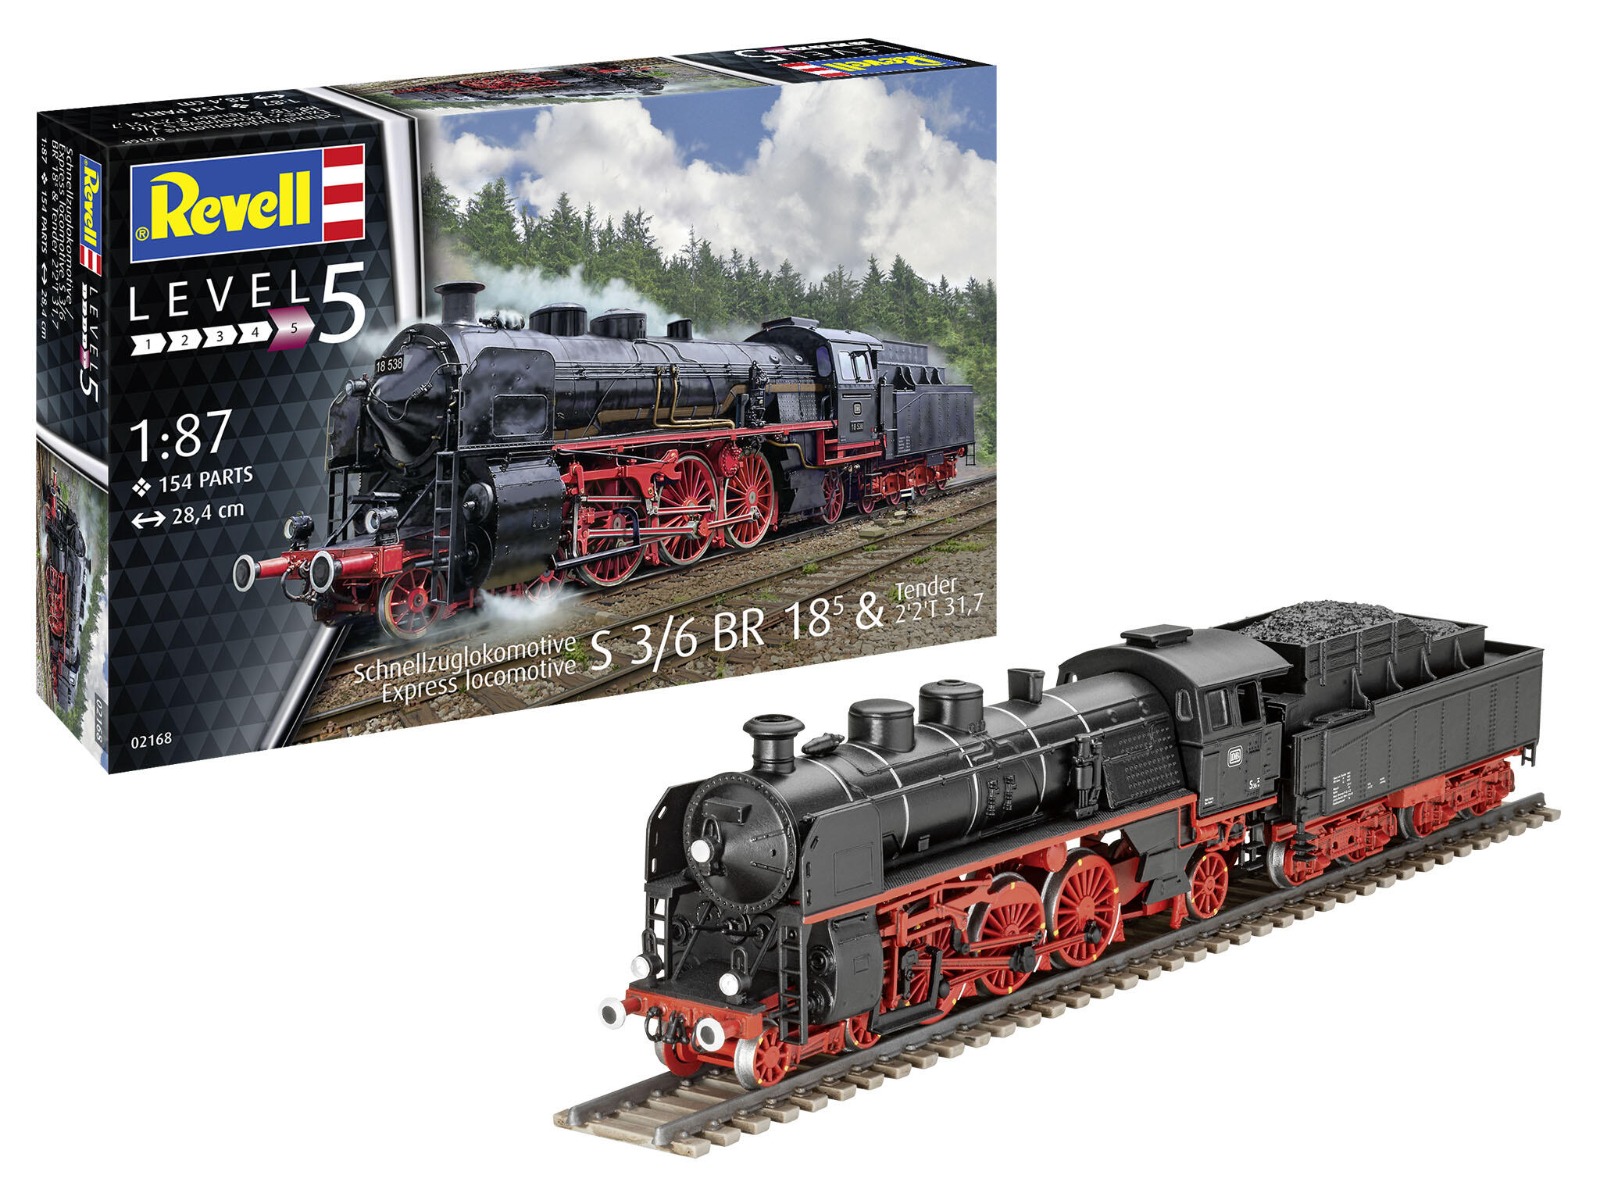 Revell 1/87 Express Locomotive S3/6 BR18(5) With Tender 2'2'T